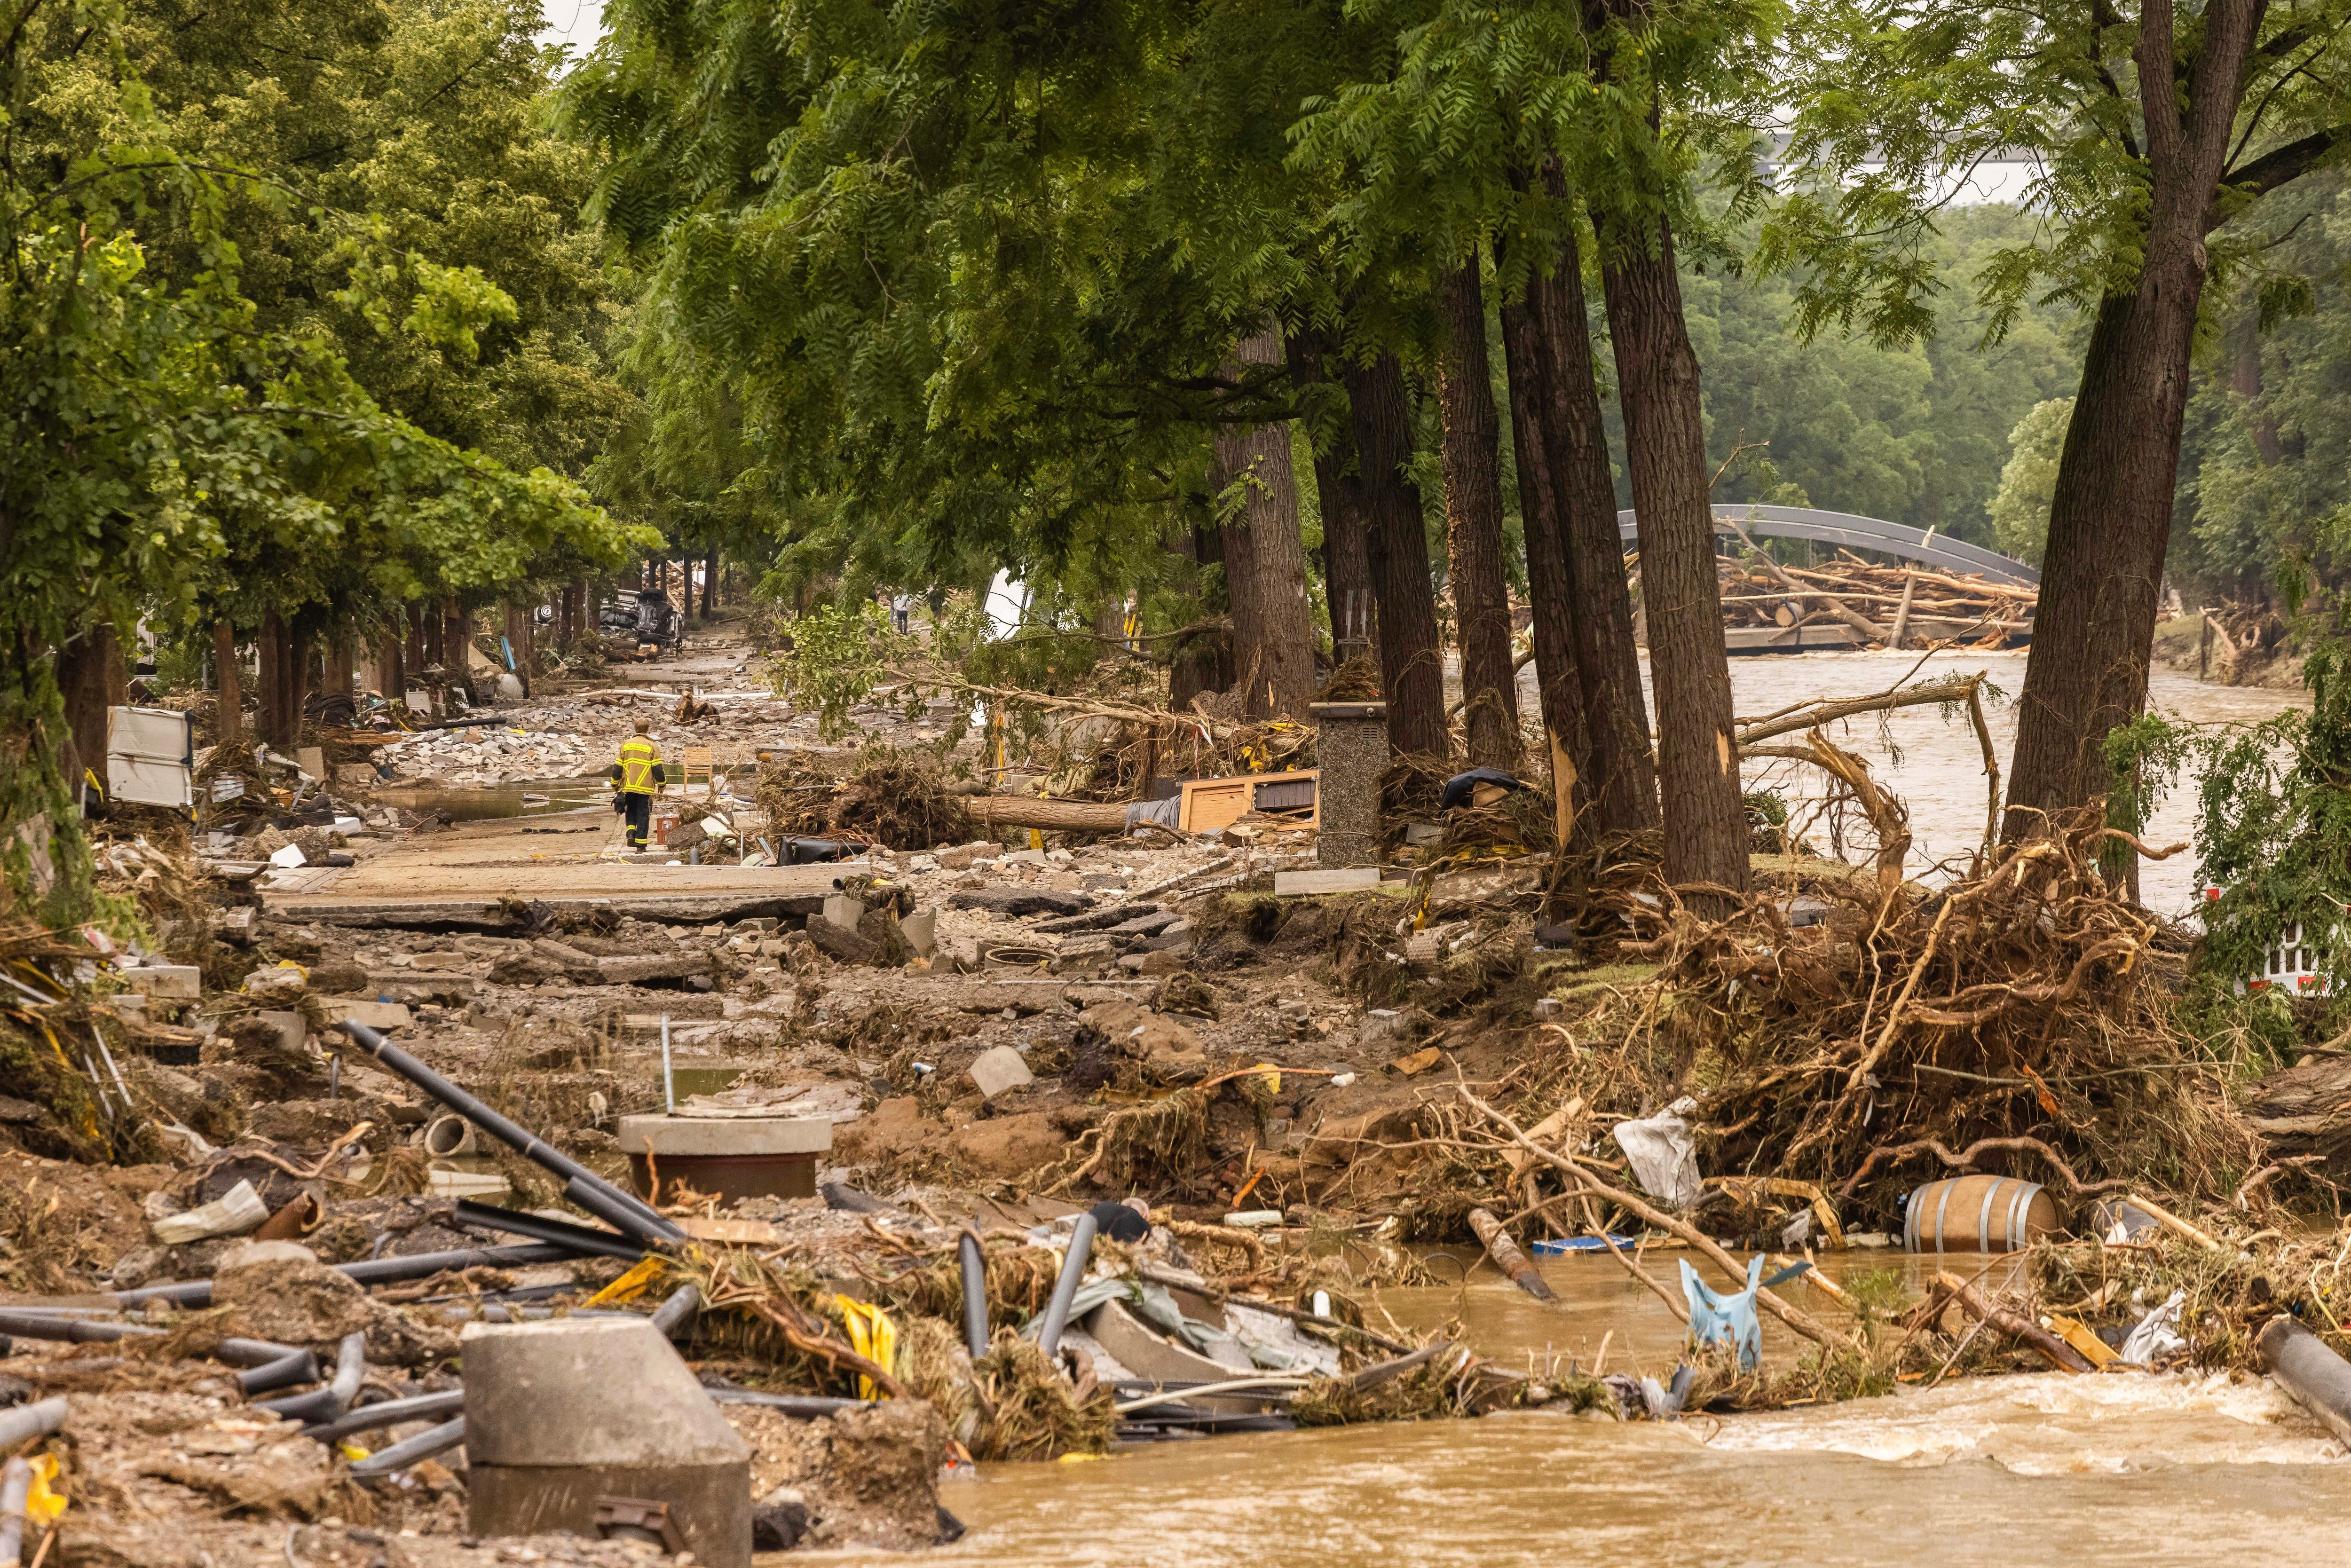 A firefighter walks through a debris field caused by flooding in Rhineland-Palatinate, Bad Neuenahr, on 16 July.